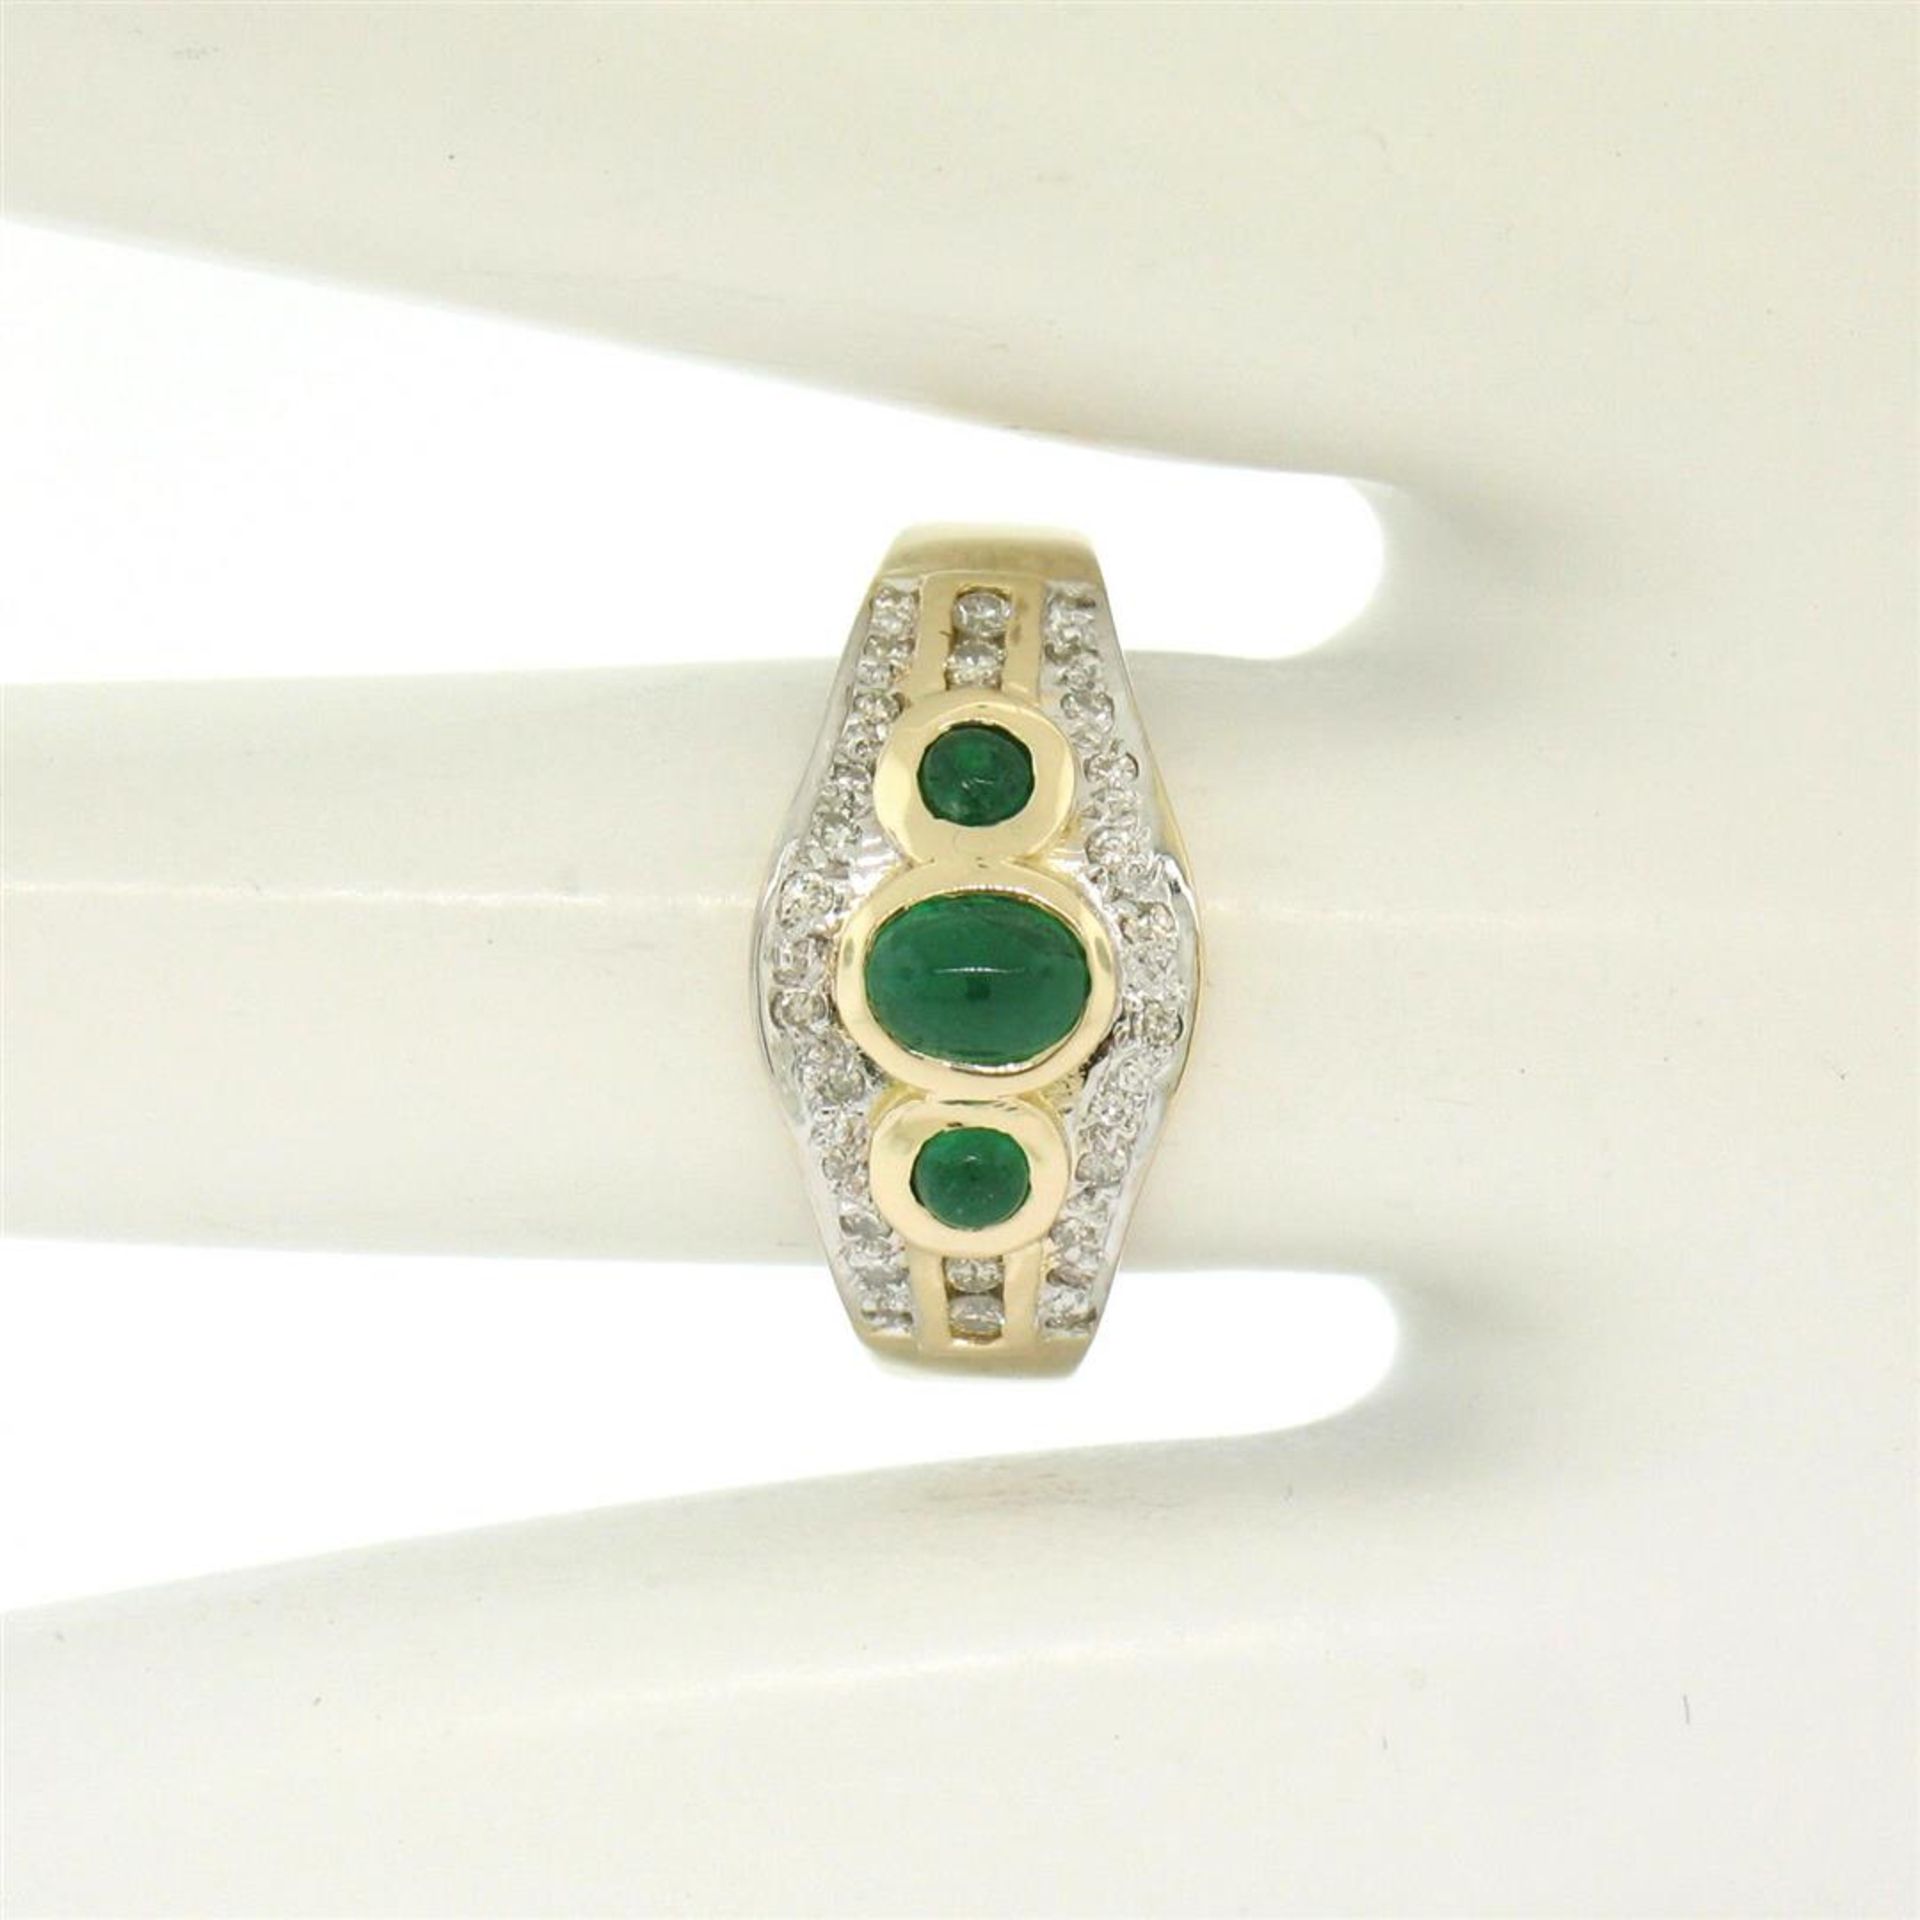 Petite 14K TT Gold 0.68 ctw 3 Cabochon Emerald & Diamond Accented Cocktail Ring - Image 6 of 9